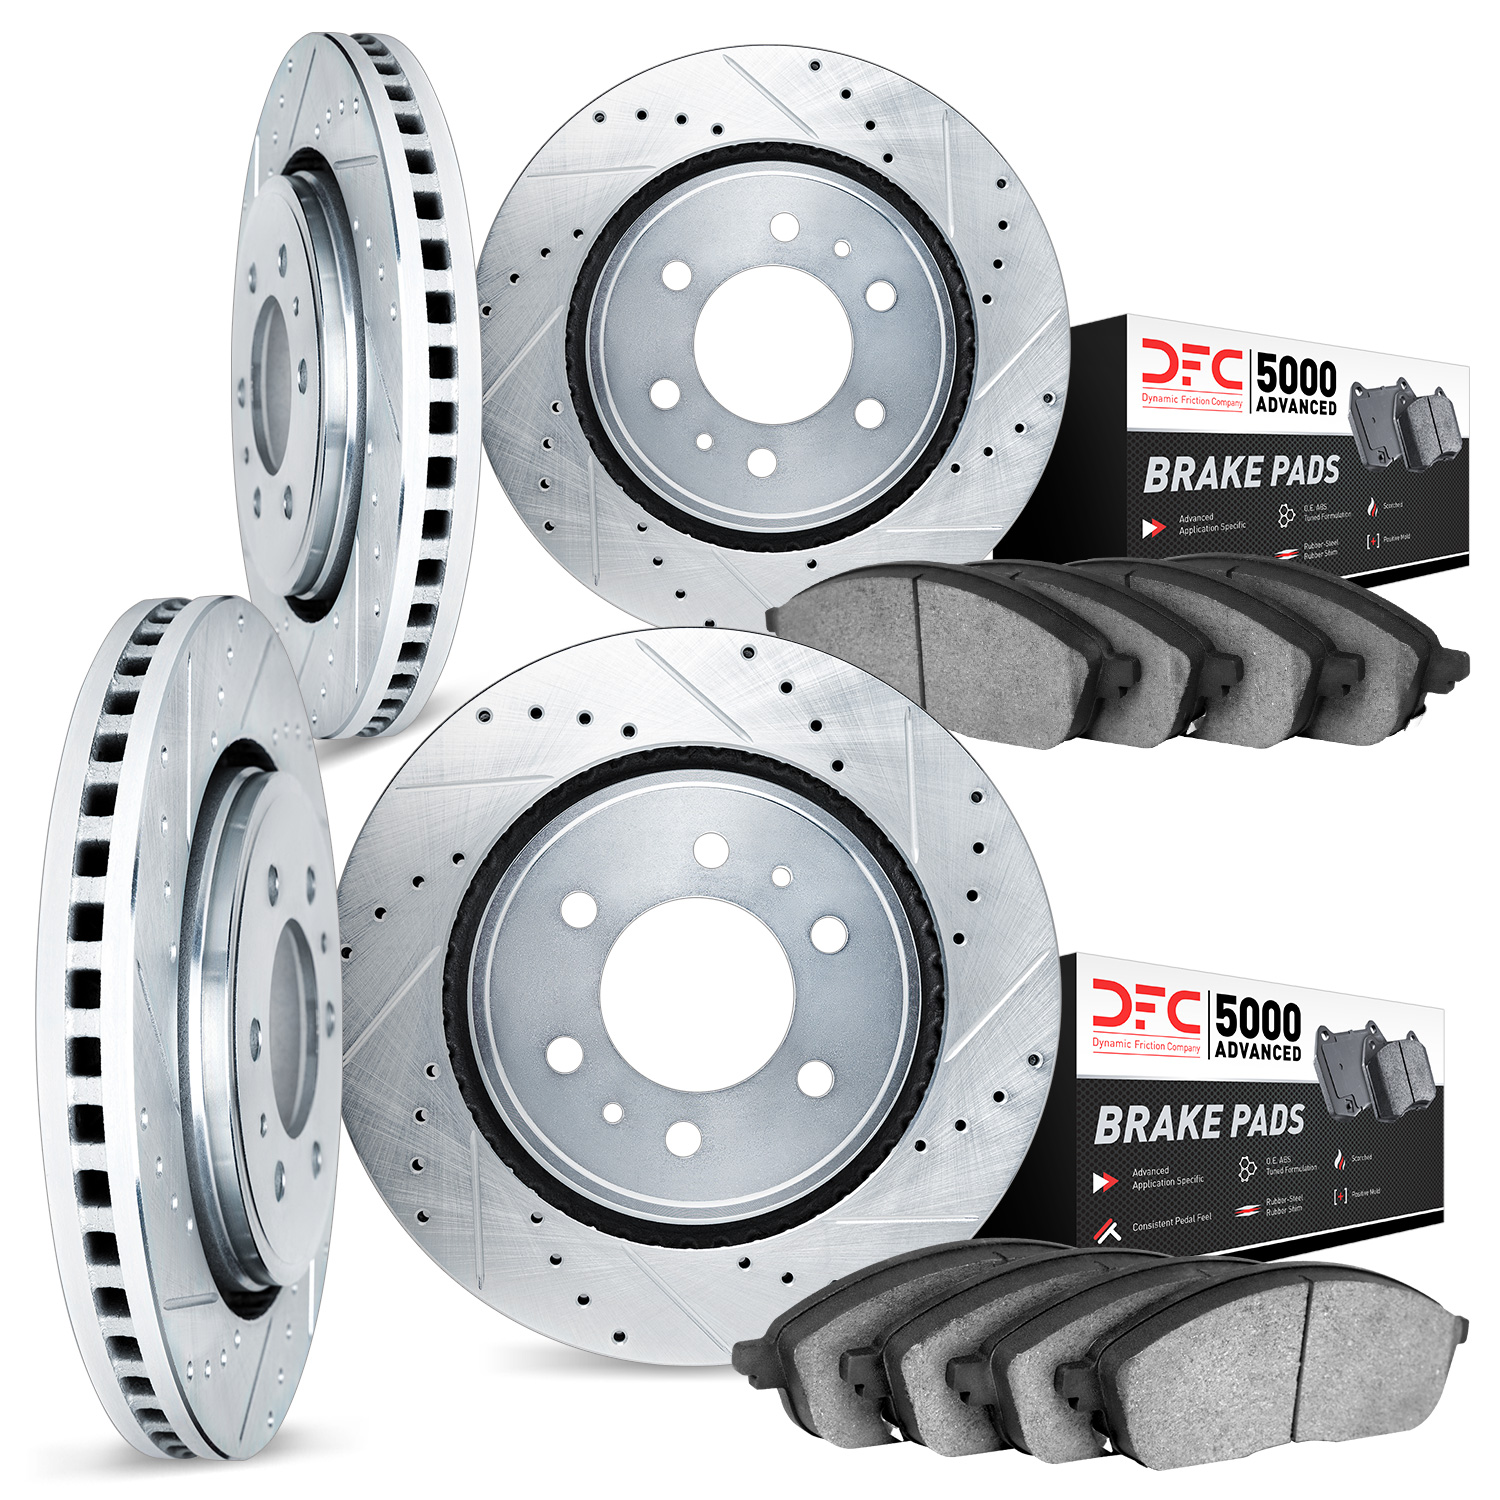 7504-48035 Drilled/Slotted Brake Rotors w/5000 Advanced Brake Pads Kit [Silver], 2002-2005 GM, Position: Front and Rear